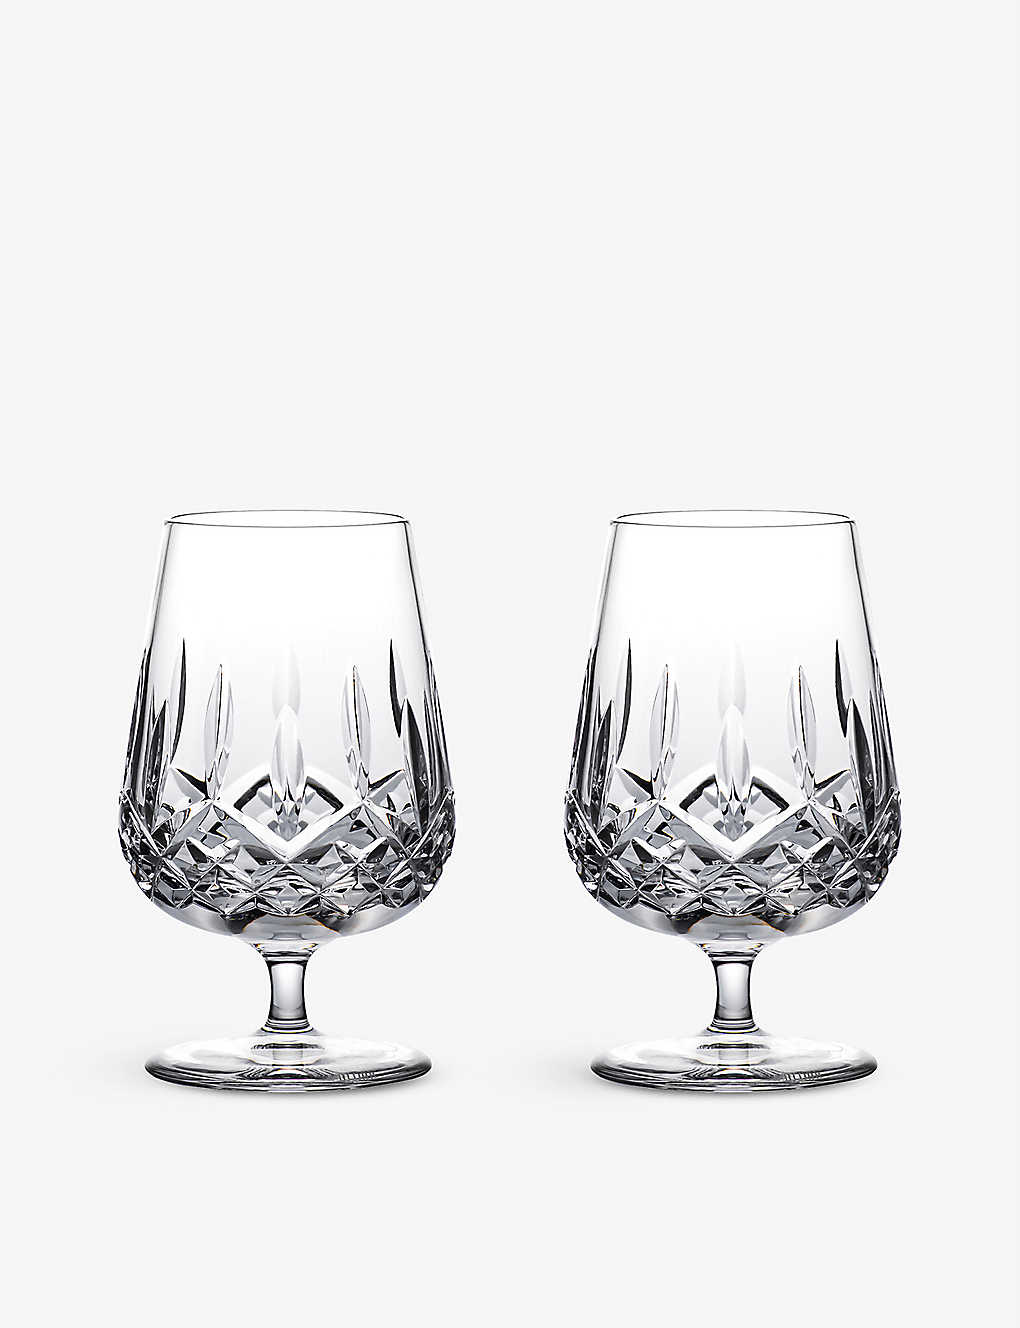 WATERFORD コニッサー リズモア スニッファーキャップ クリスタル タンブラー Connoisseur Lismore snifter-cap crystal tumblers